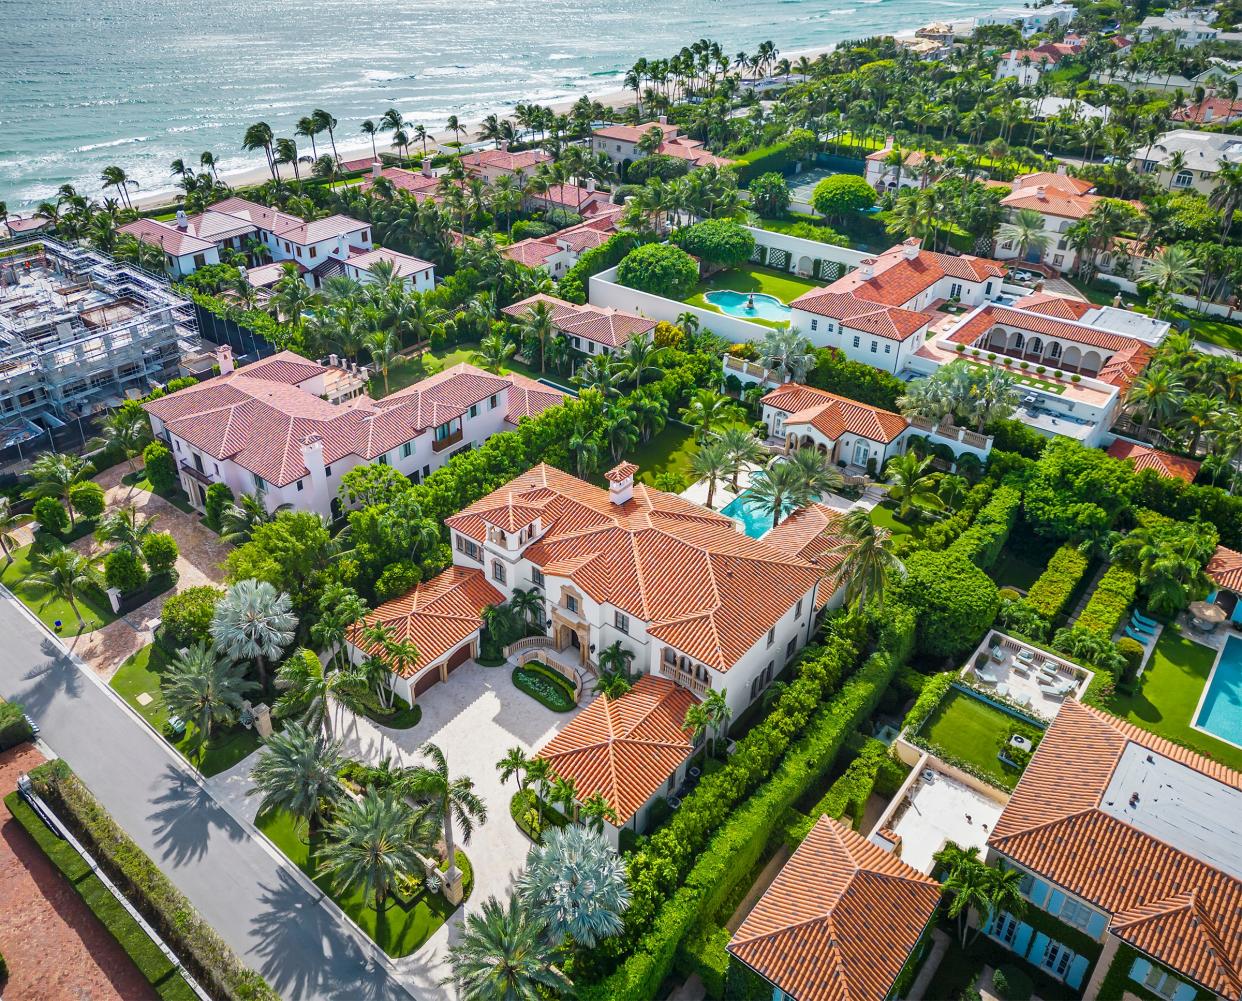 A Palm Beach estate at 120 Clarendon Ave., center foreground, entered the multiple listing service in November at $36.5 million, listed by the Corcoran Group. The house helped boost the number of single-family houses and townhomes on the island to about 78, the highest in the past three years.